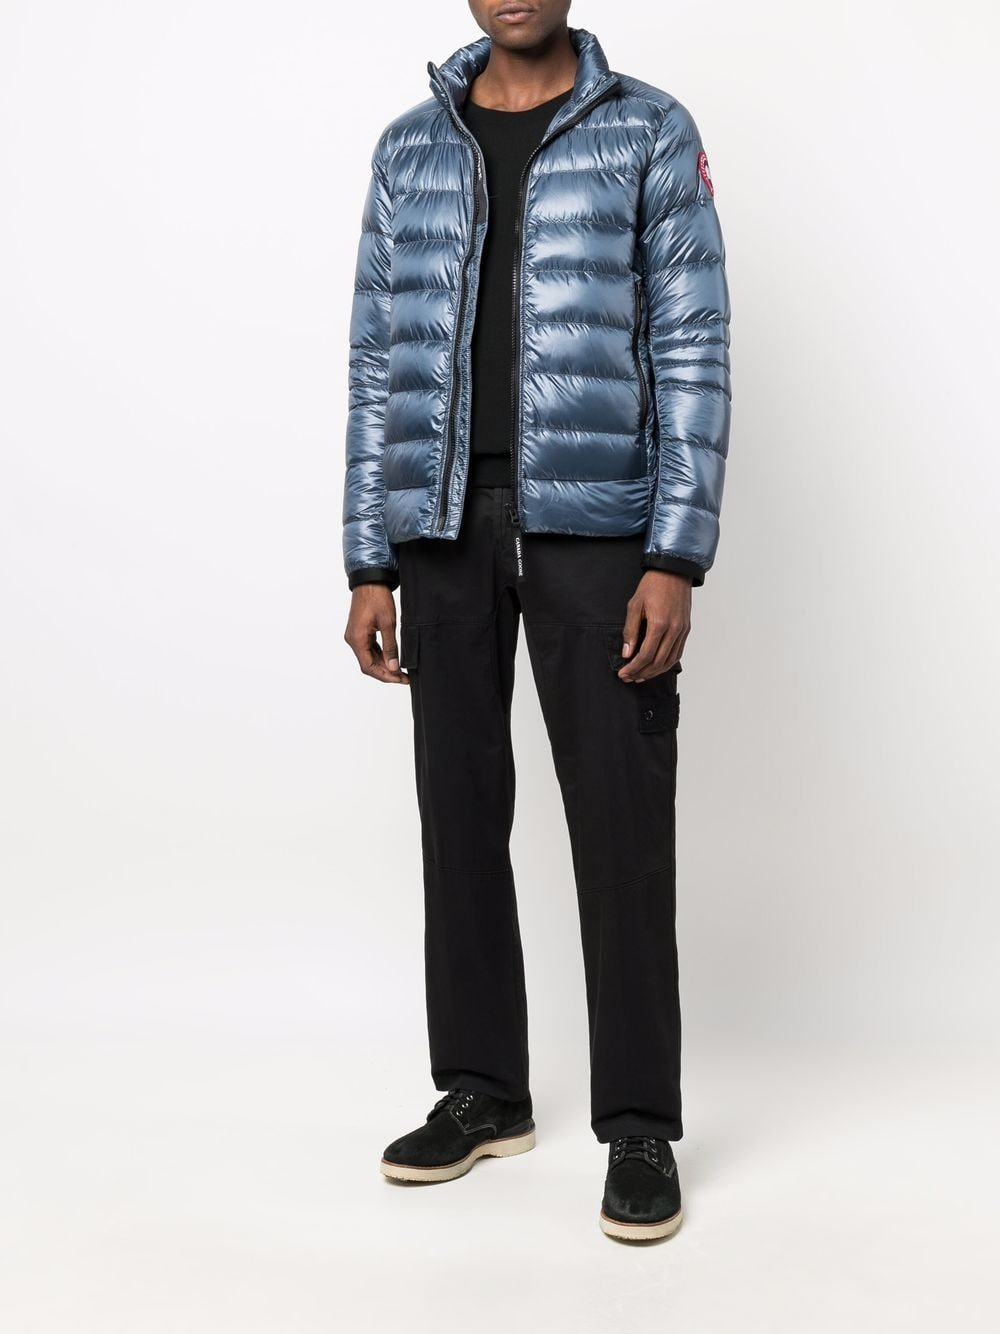 CANADA GOOSE Navy Metallic Feather-Down Padded Jacket for Men